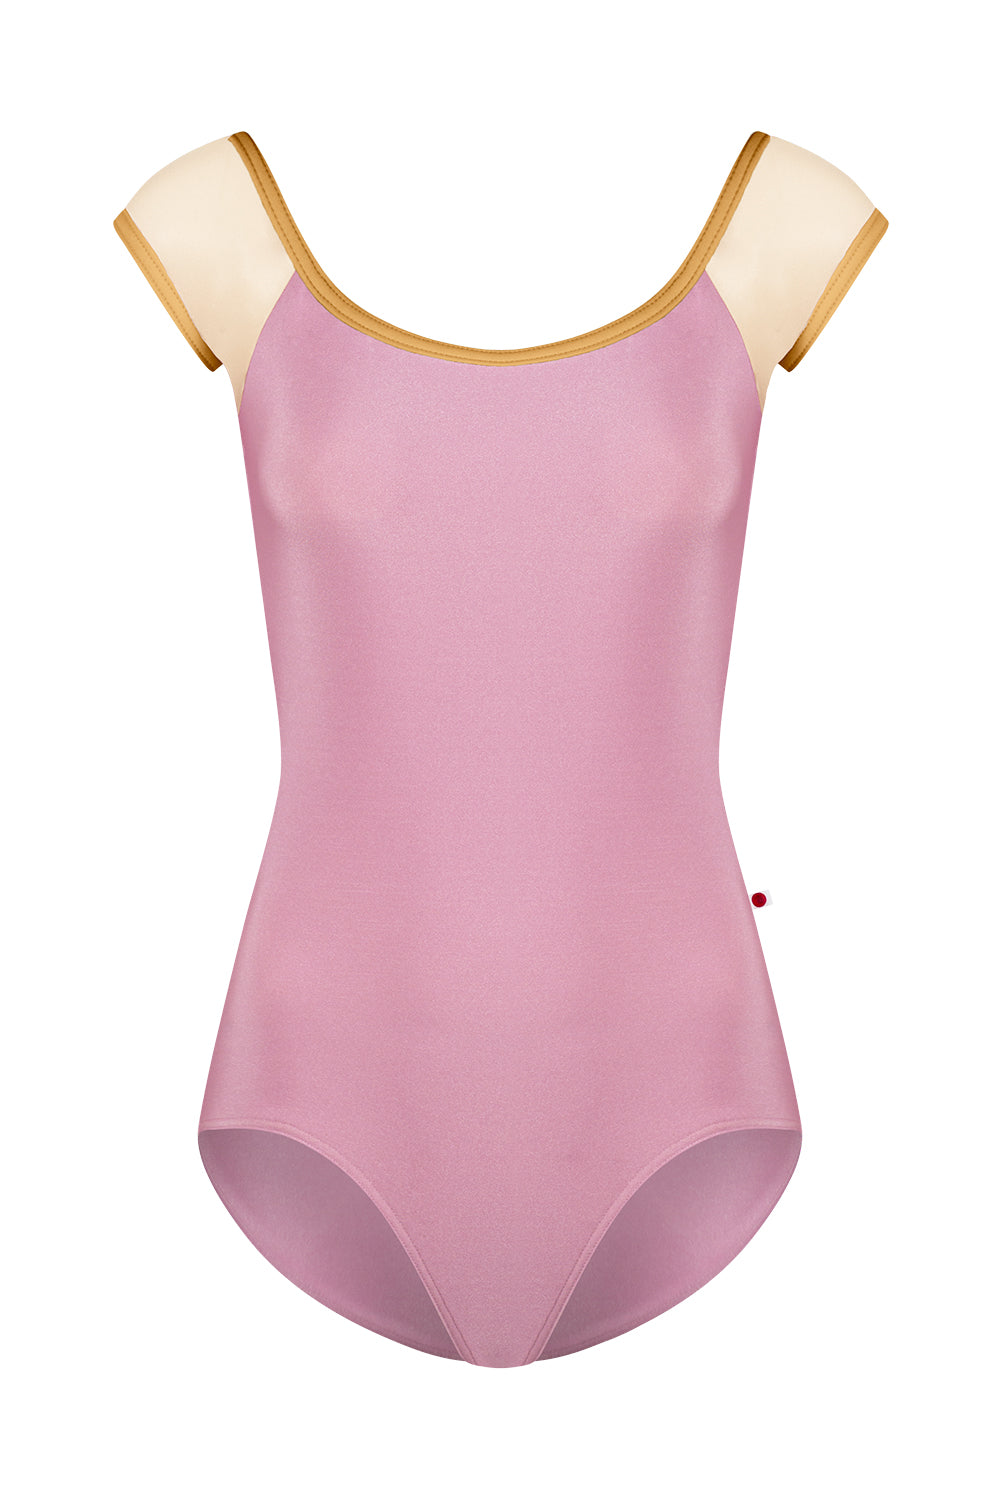 Kids Wendy leotard in N-Confetti body color with Mesh Tone 3 sleeve color and N-Base trim color